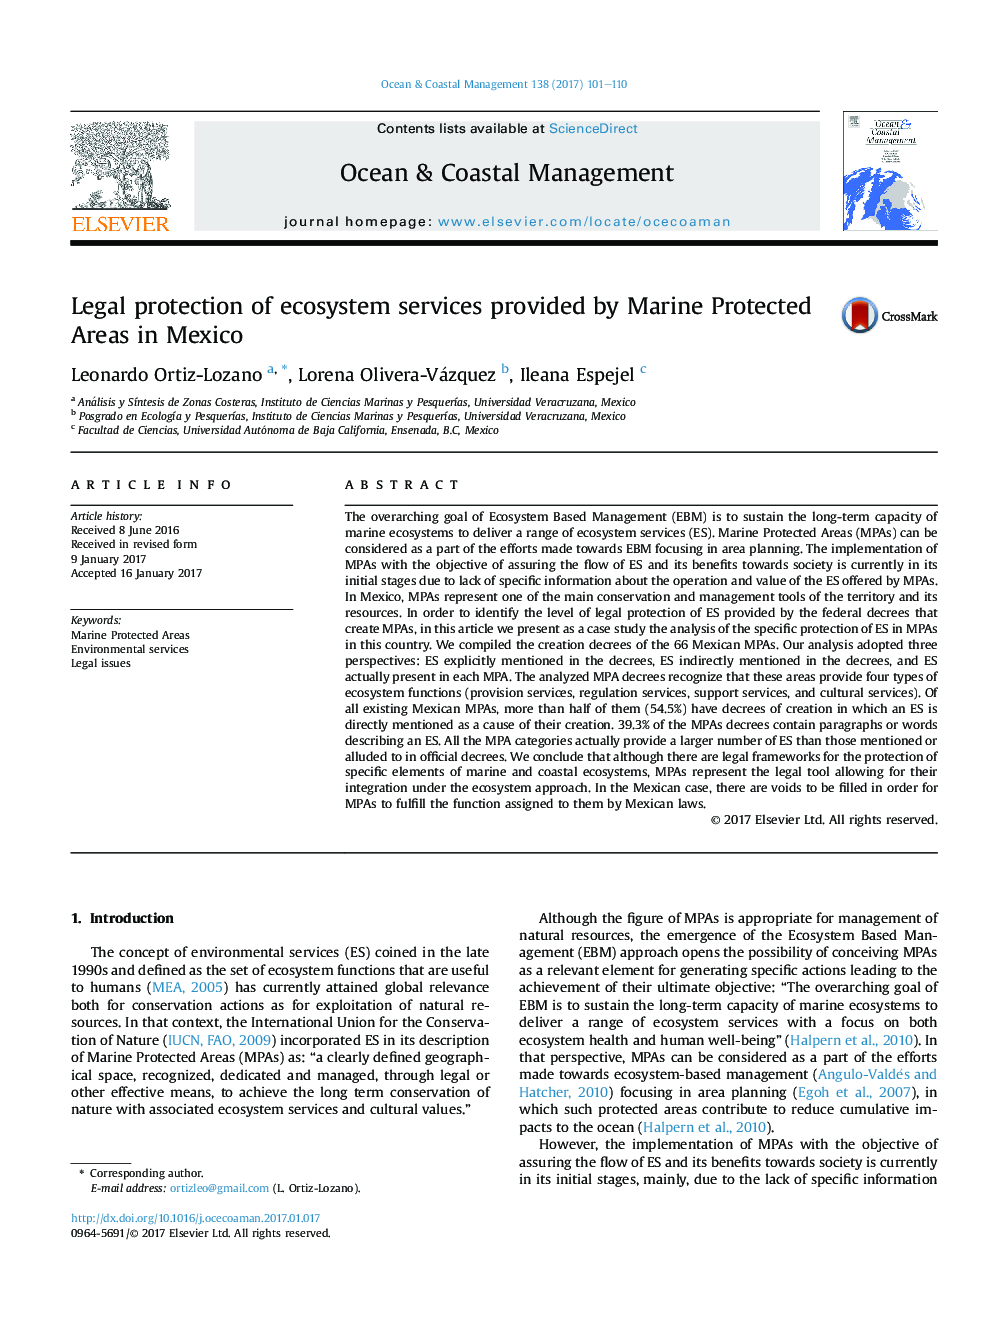 Legal protection of ecosystem services provided by Marine Protected Areas in Mexico